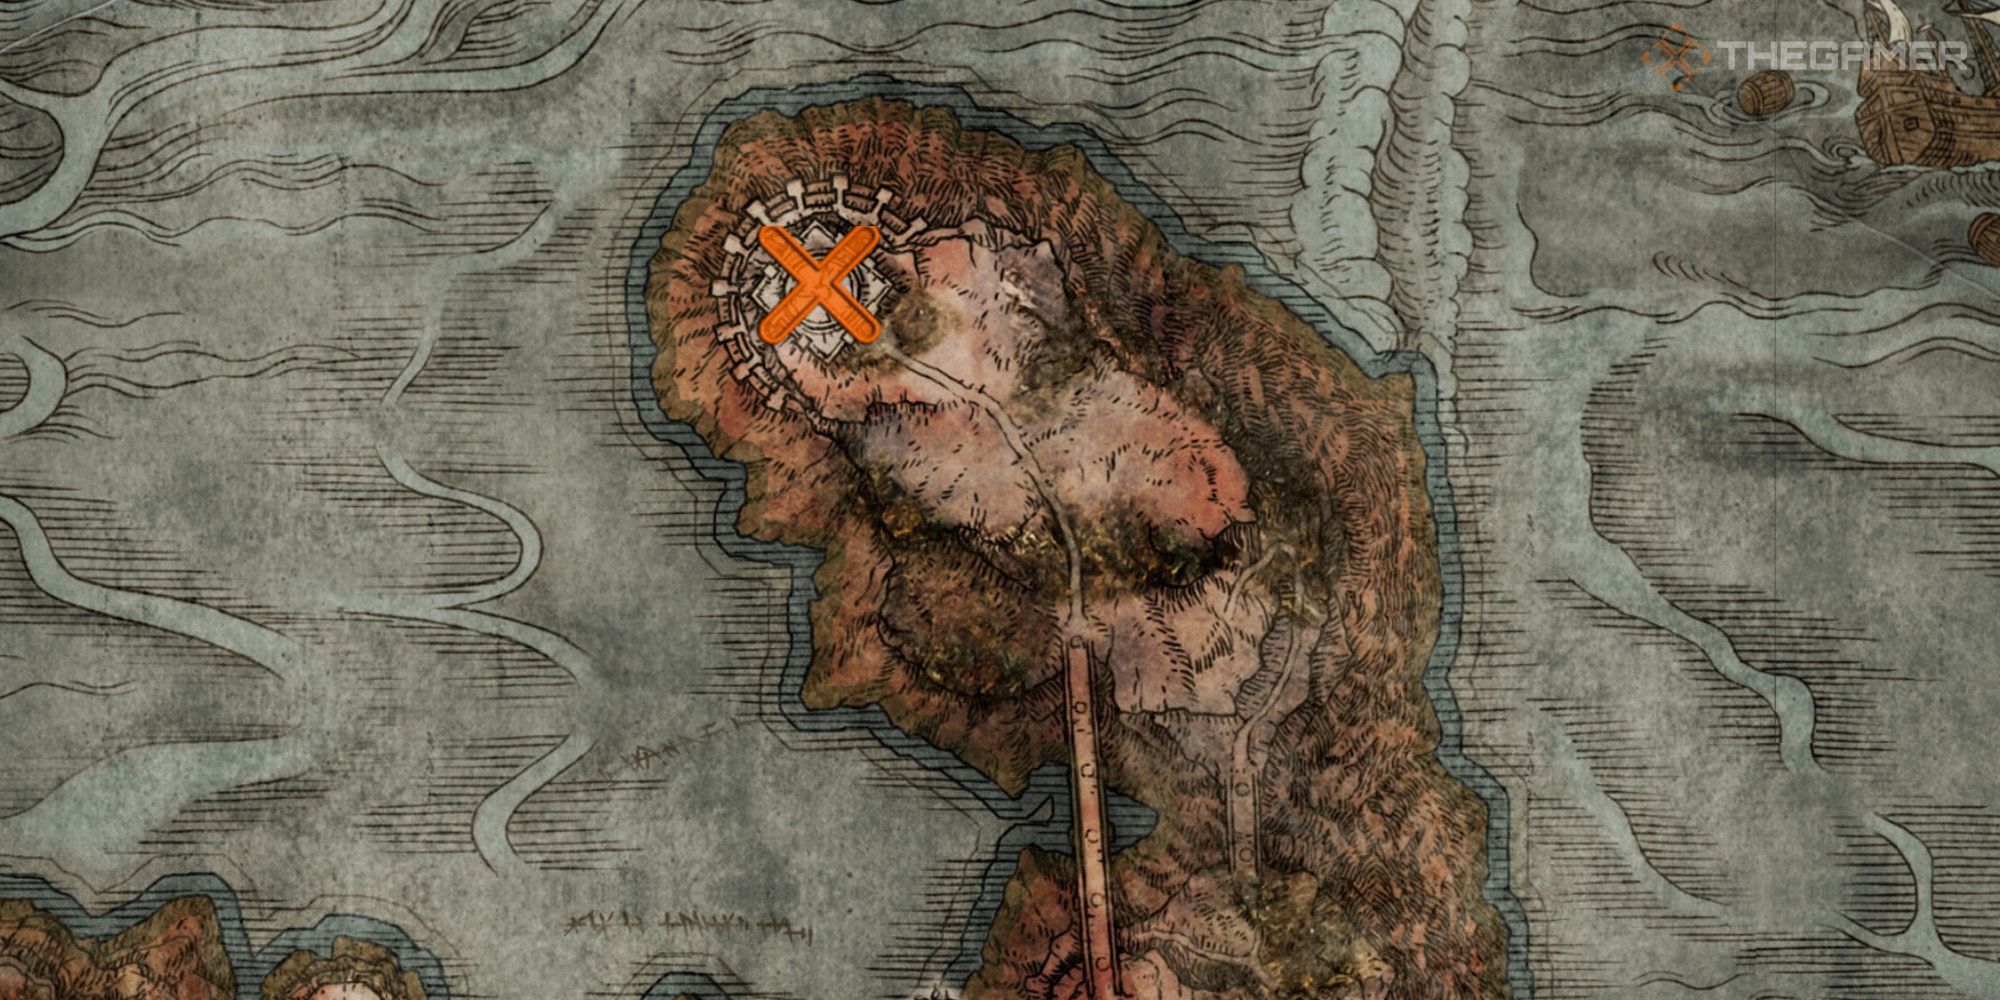 Map showing the location of Gurranq, Beast Clergyman, within the Caelid region of Elden Ring